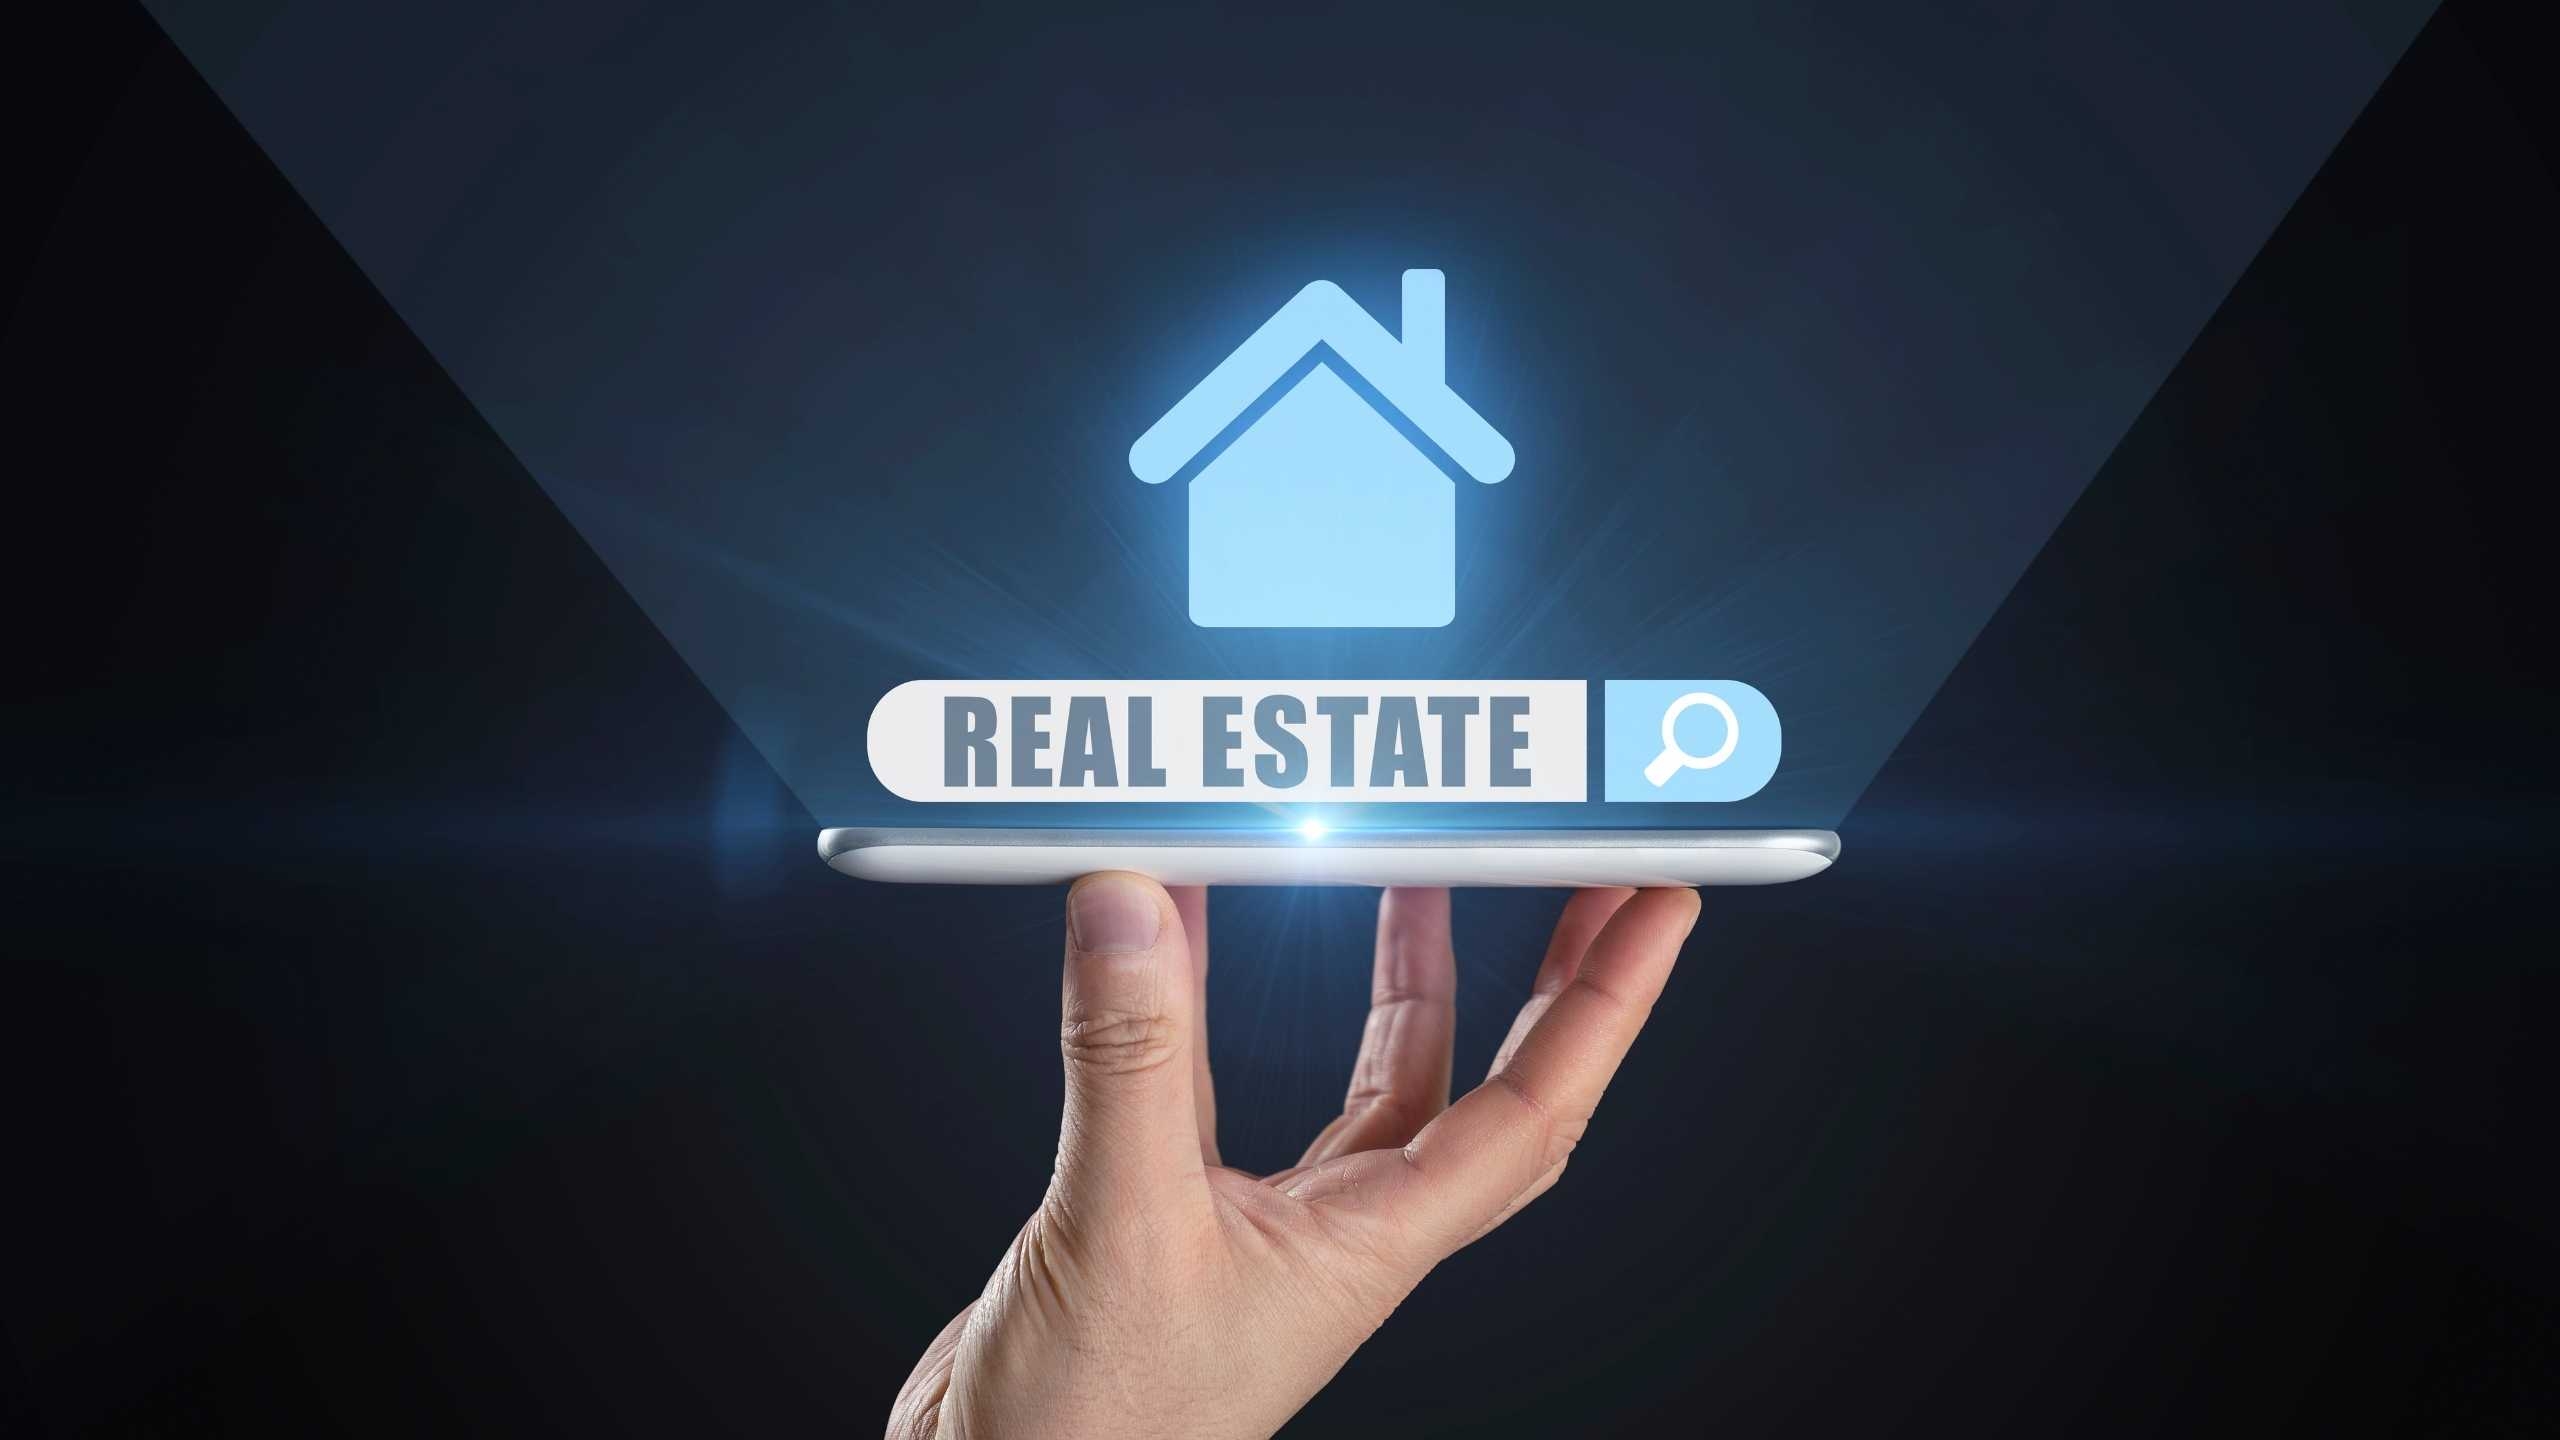 How is Technology Altering the Real Estate Market?